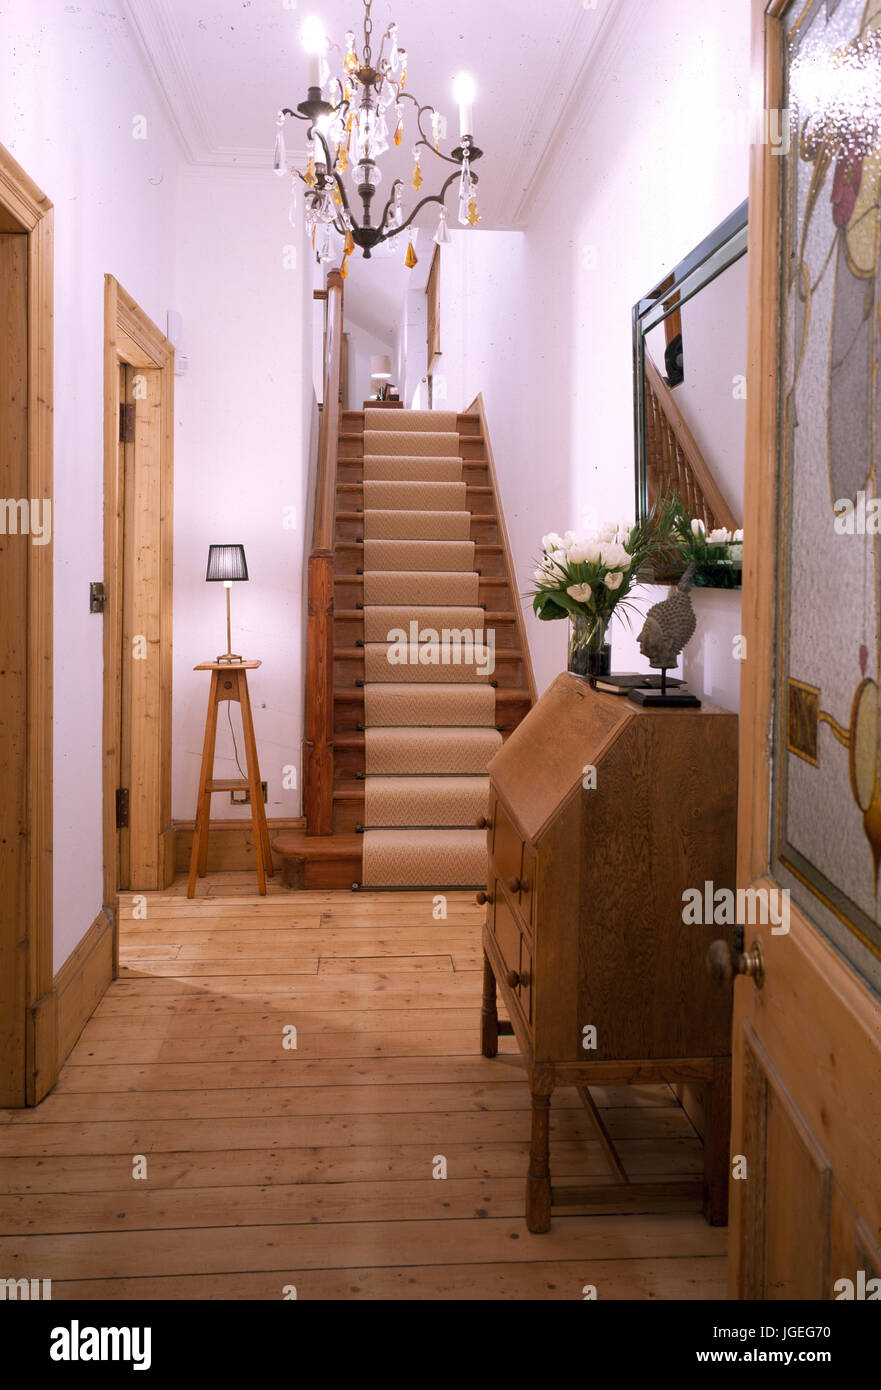 Hall With Striped Pine Boards And Staircase With Sisal Runner